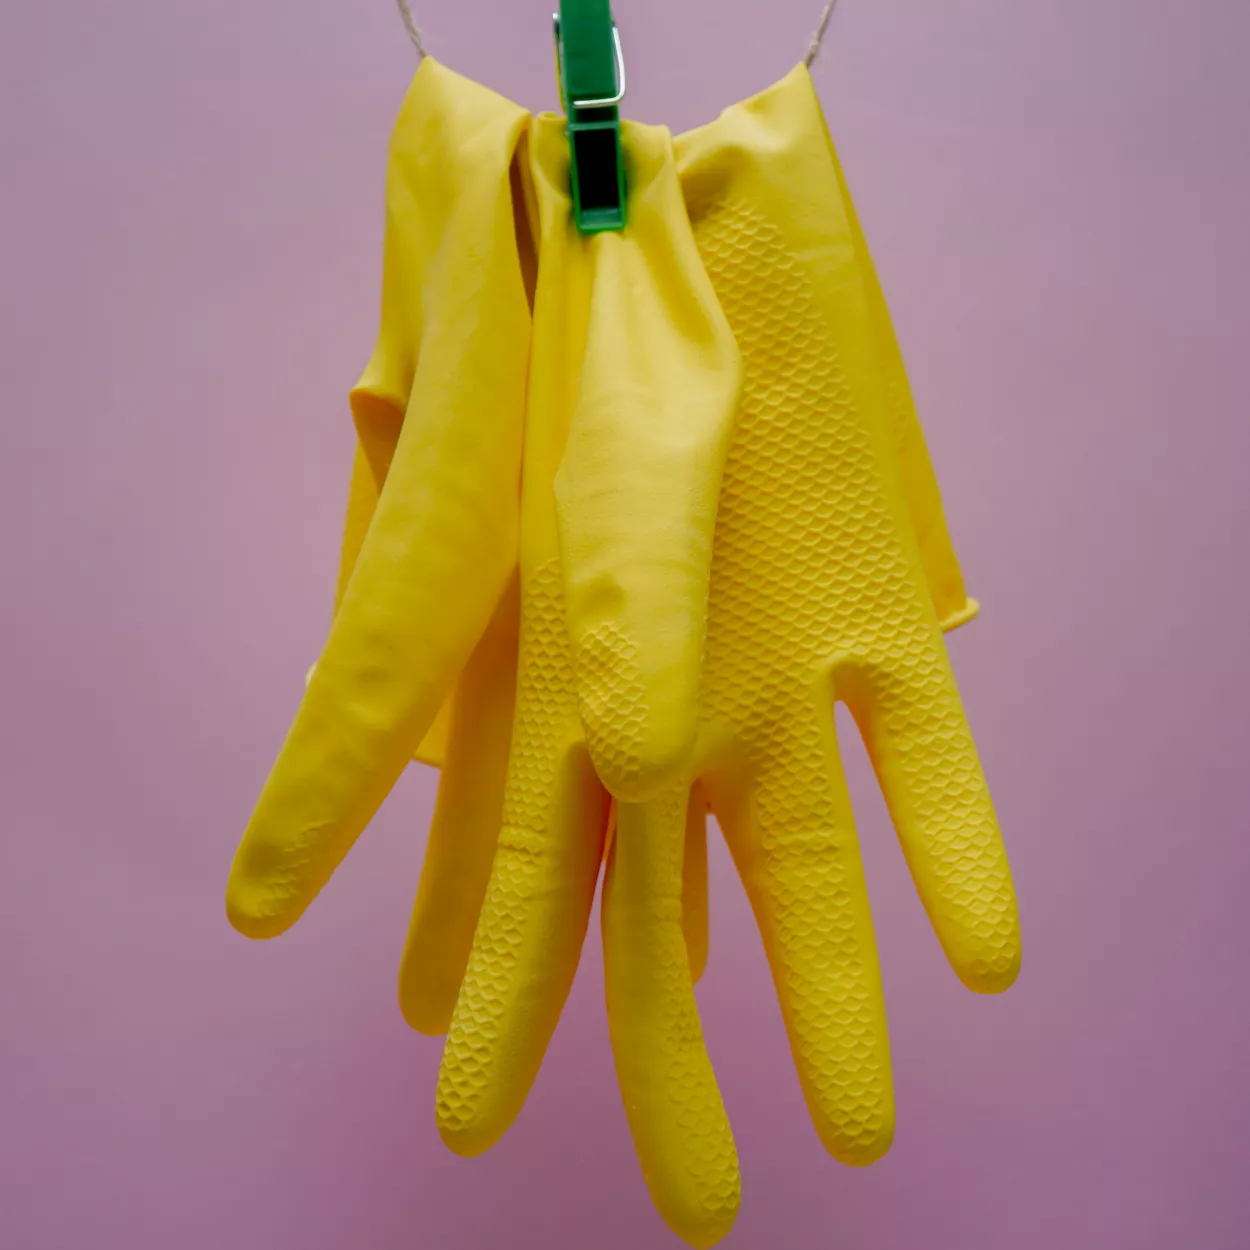 Pair of yellow washing up gloves pegged on a line, on a pink background